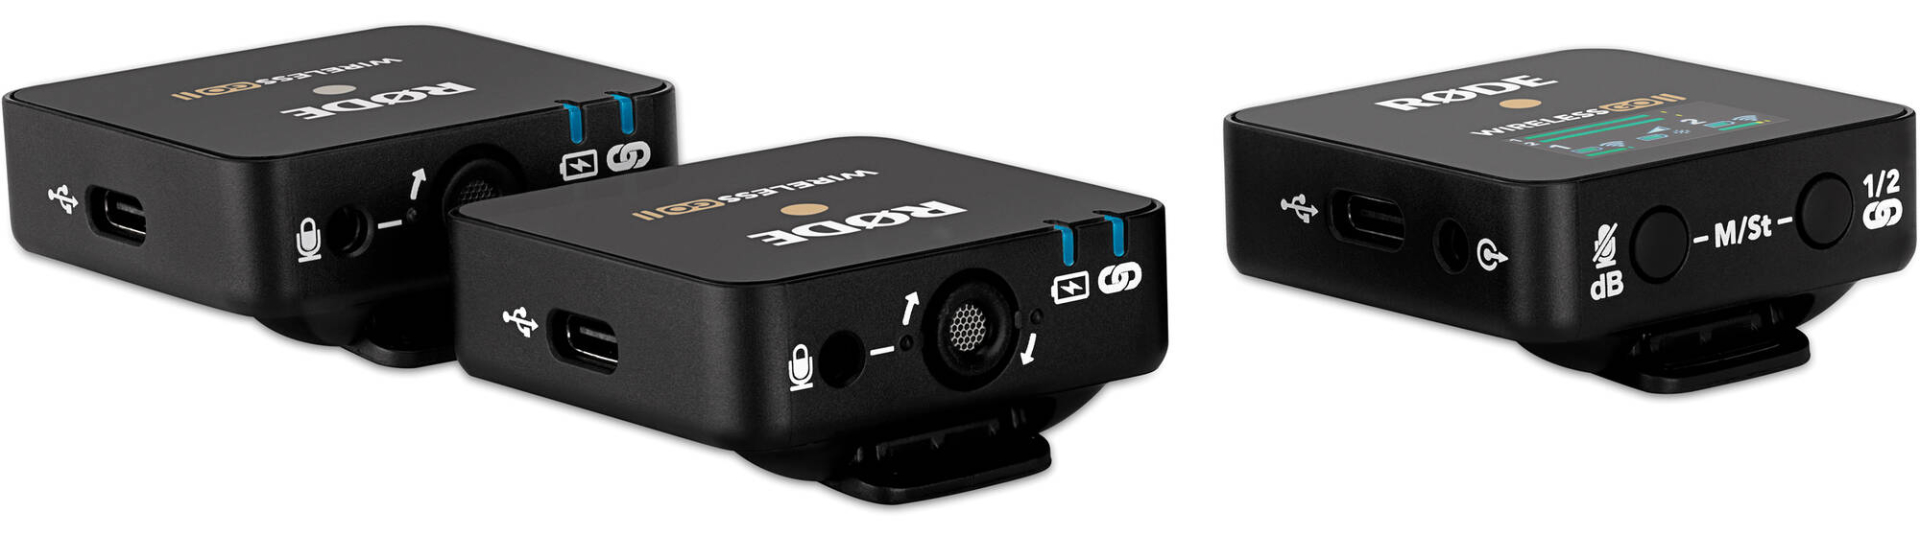 RØDE Wireless GO II Announced – Now a Dual Channel System